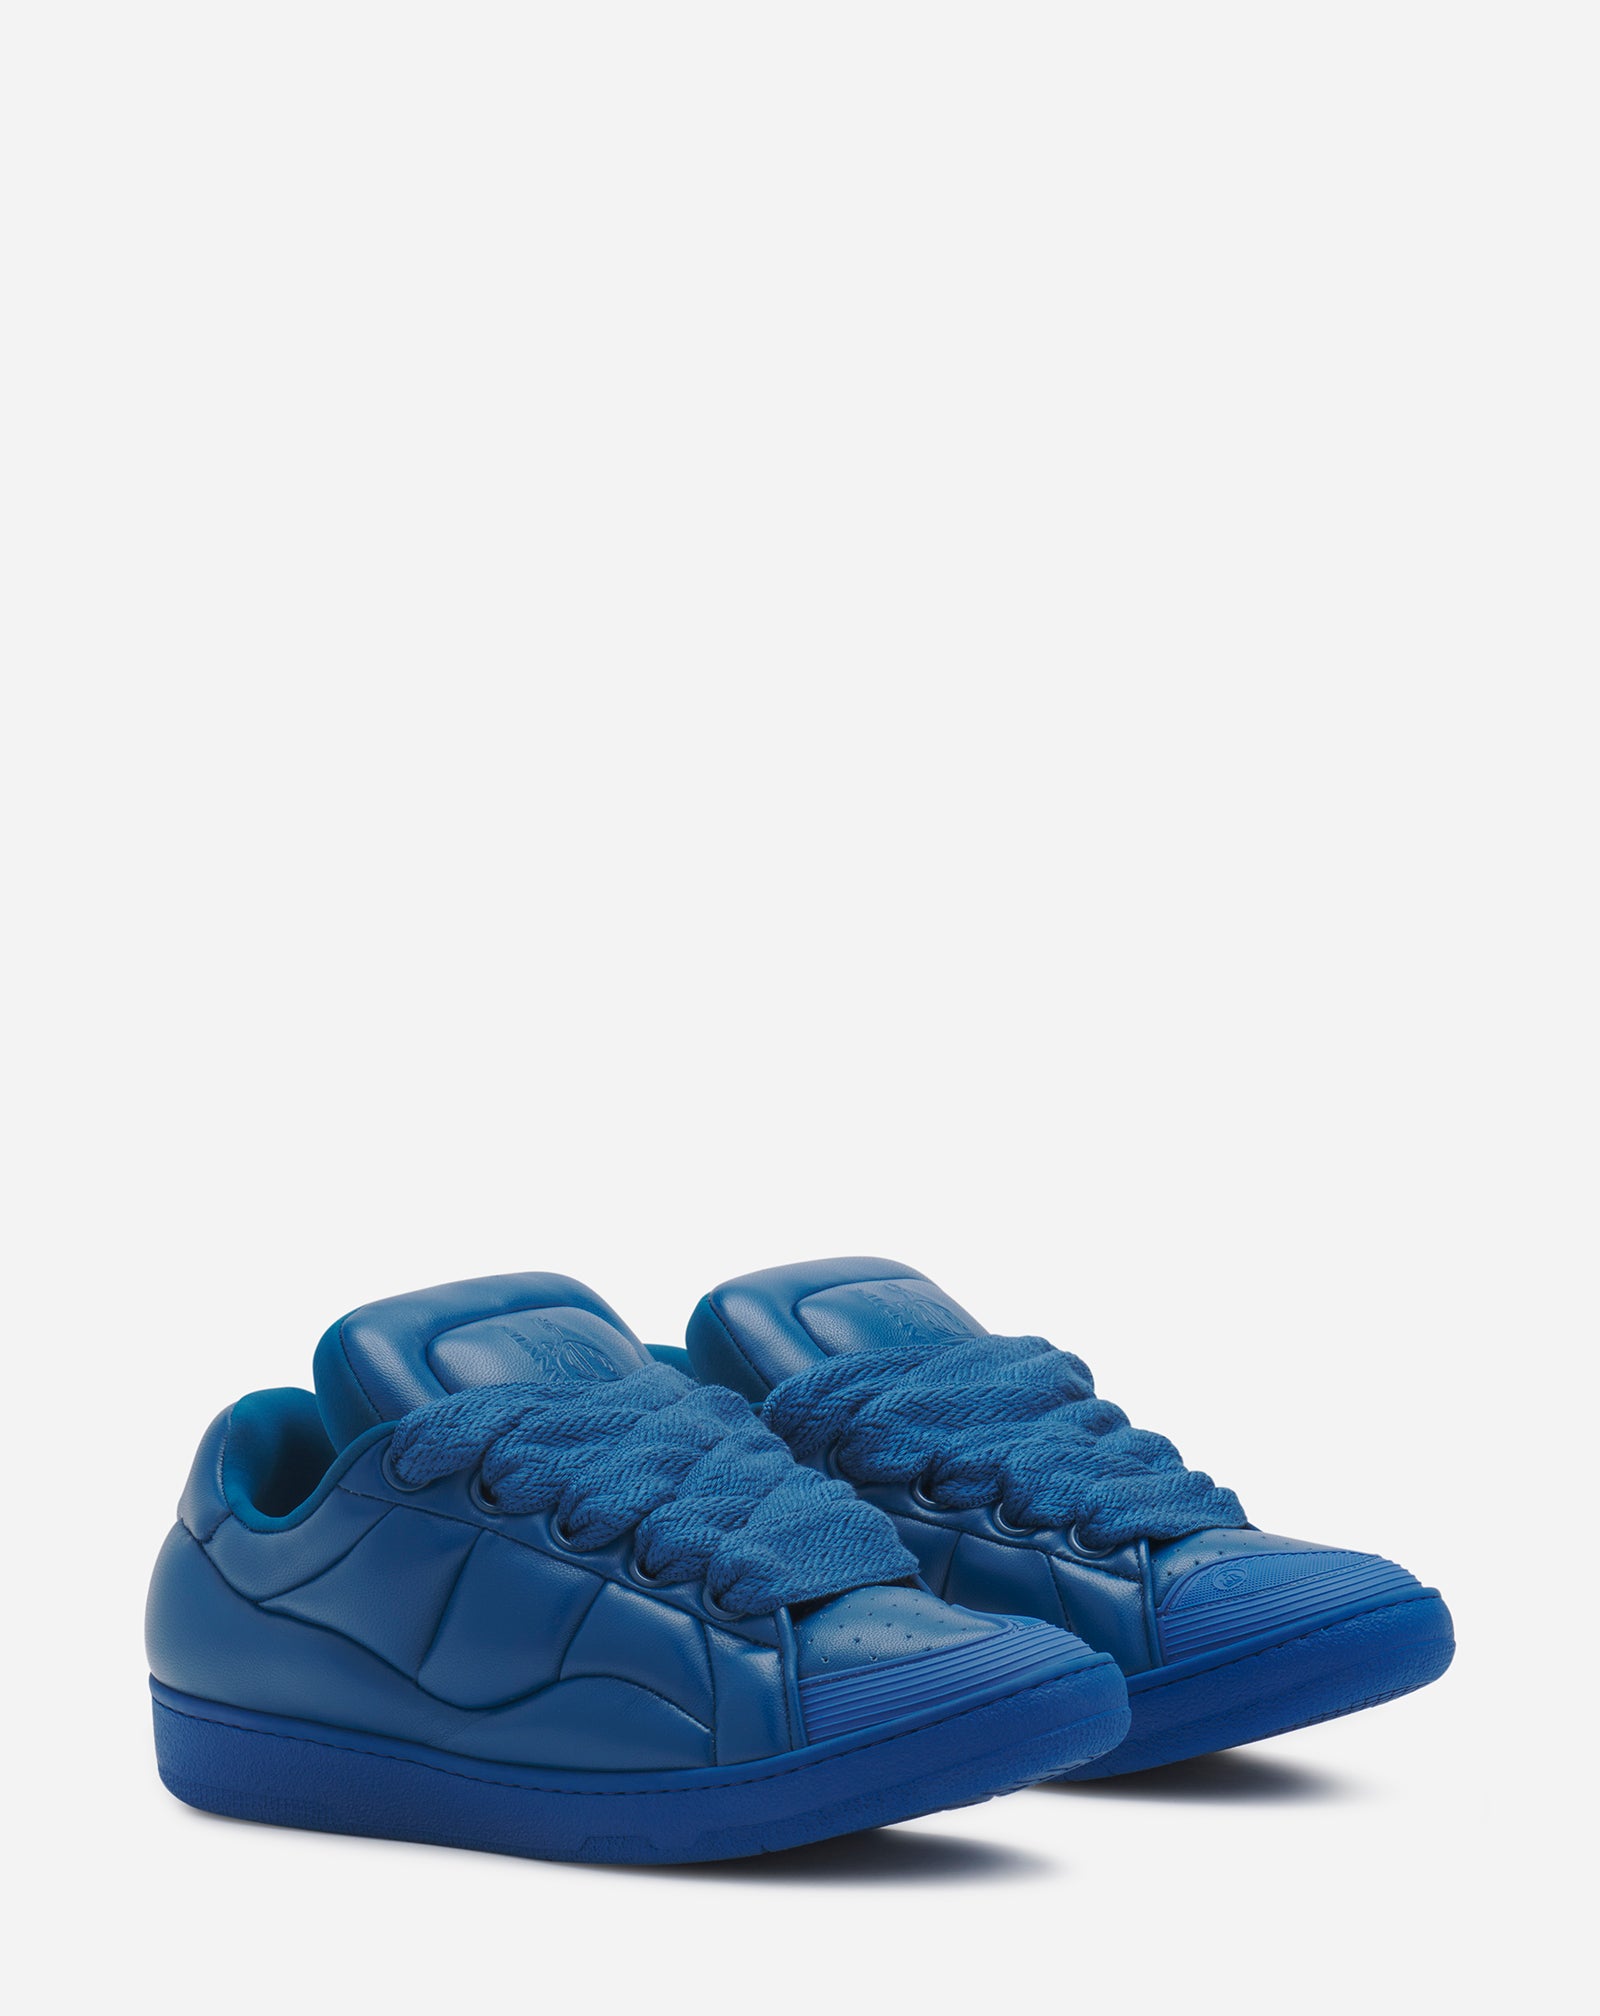 LEATHER CURB XL SNEAKERS, BLUE/BLUE